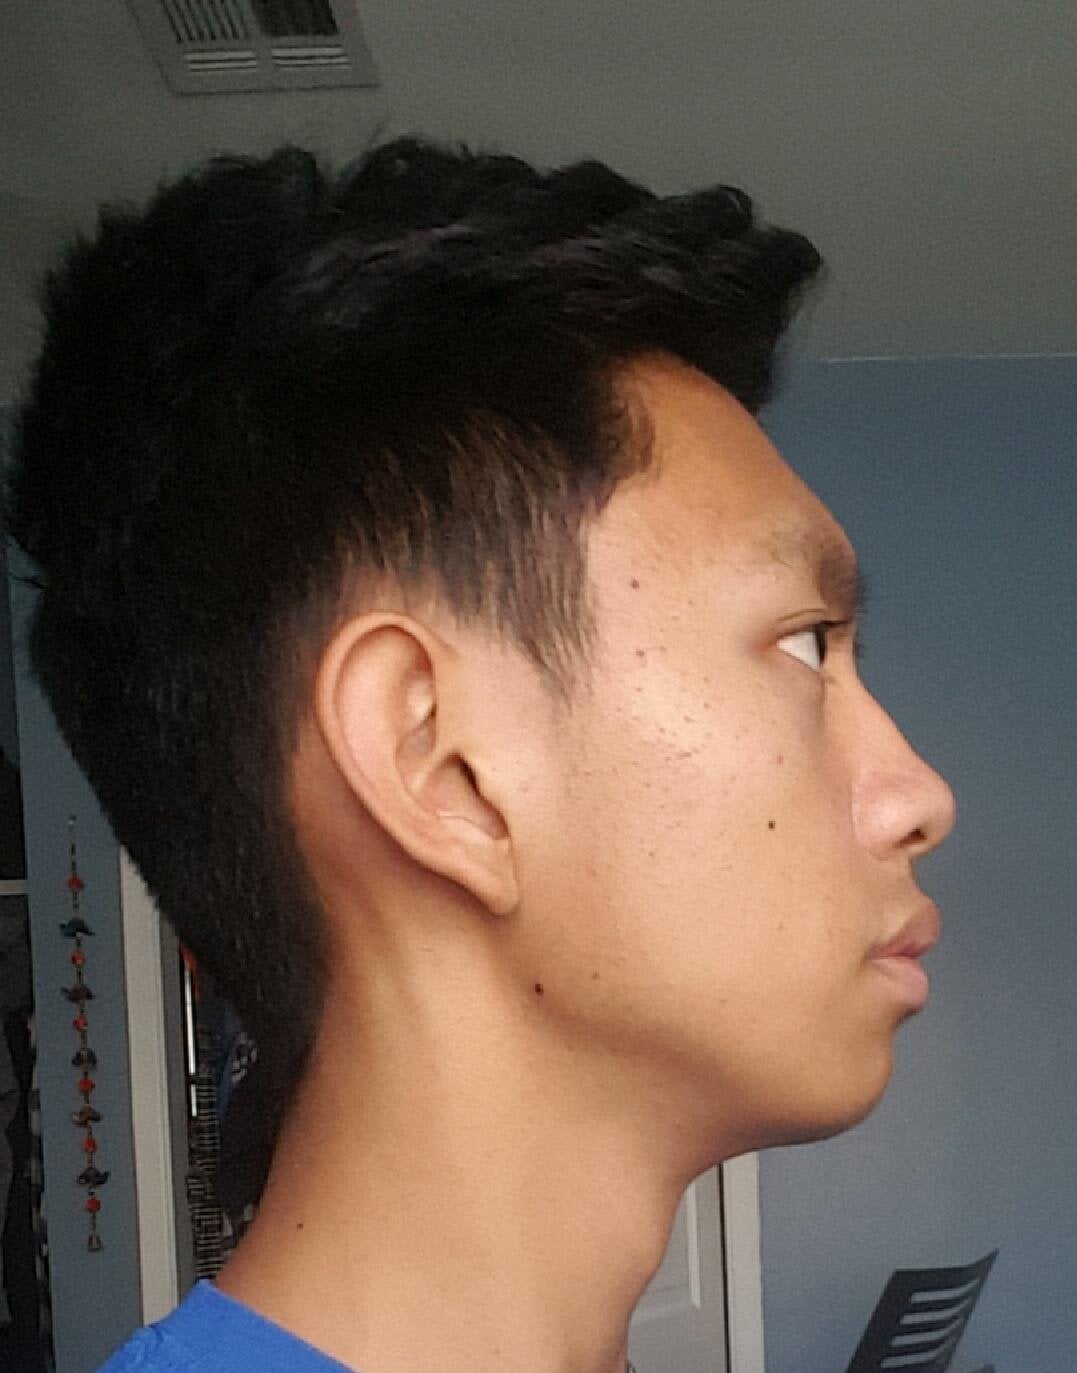 Is my weak chin/jaw really noticeable? [17 M] : amiugly